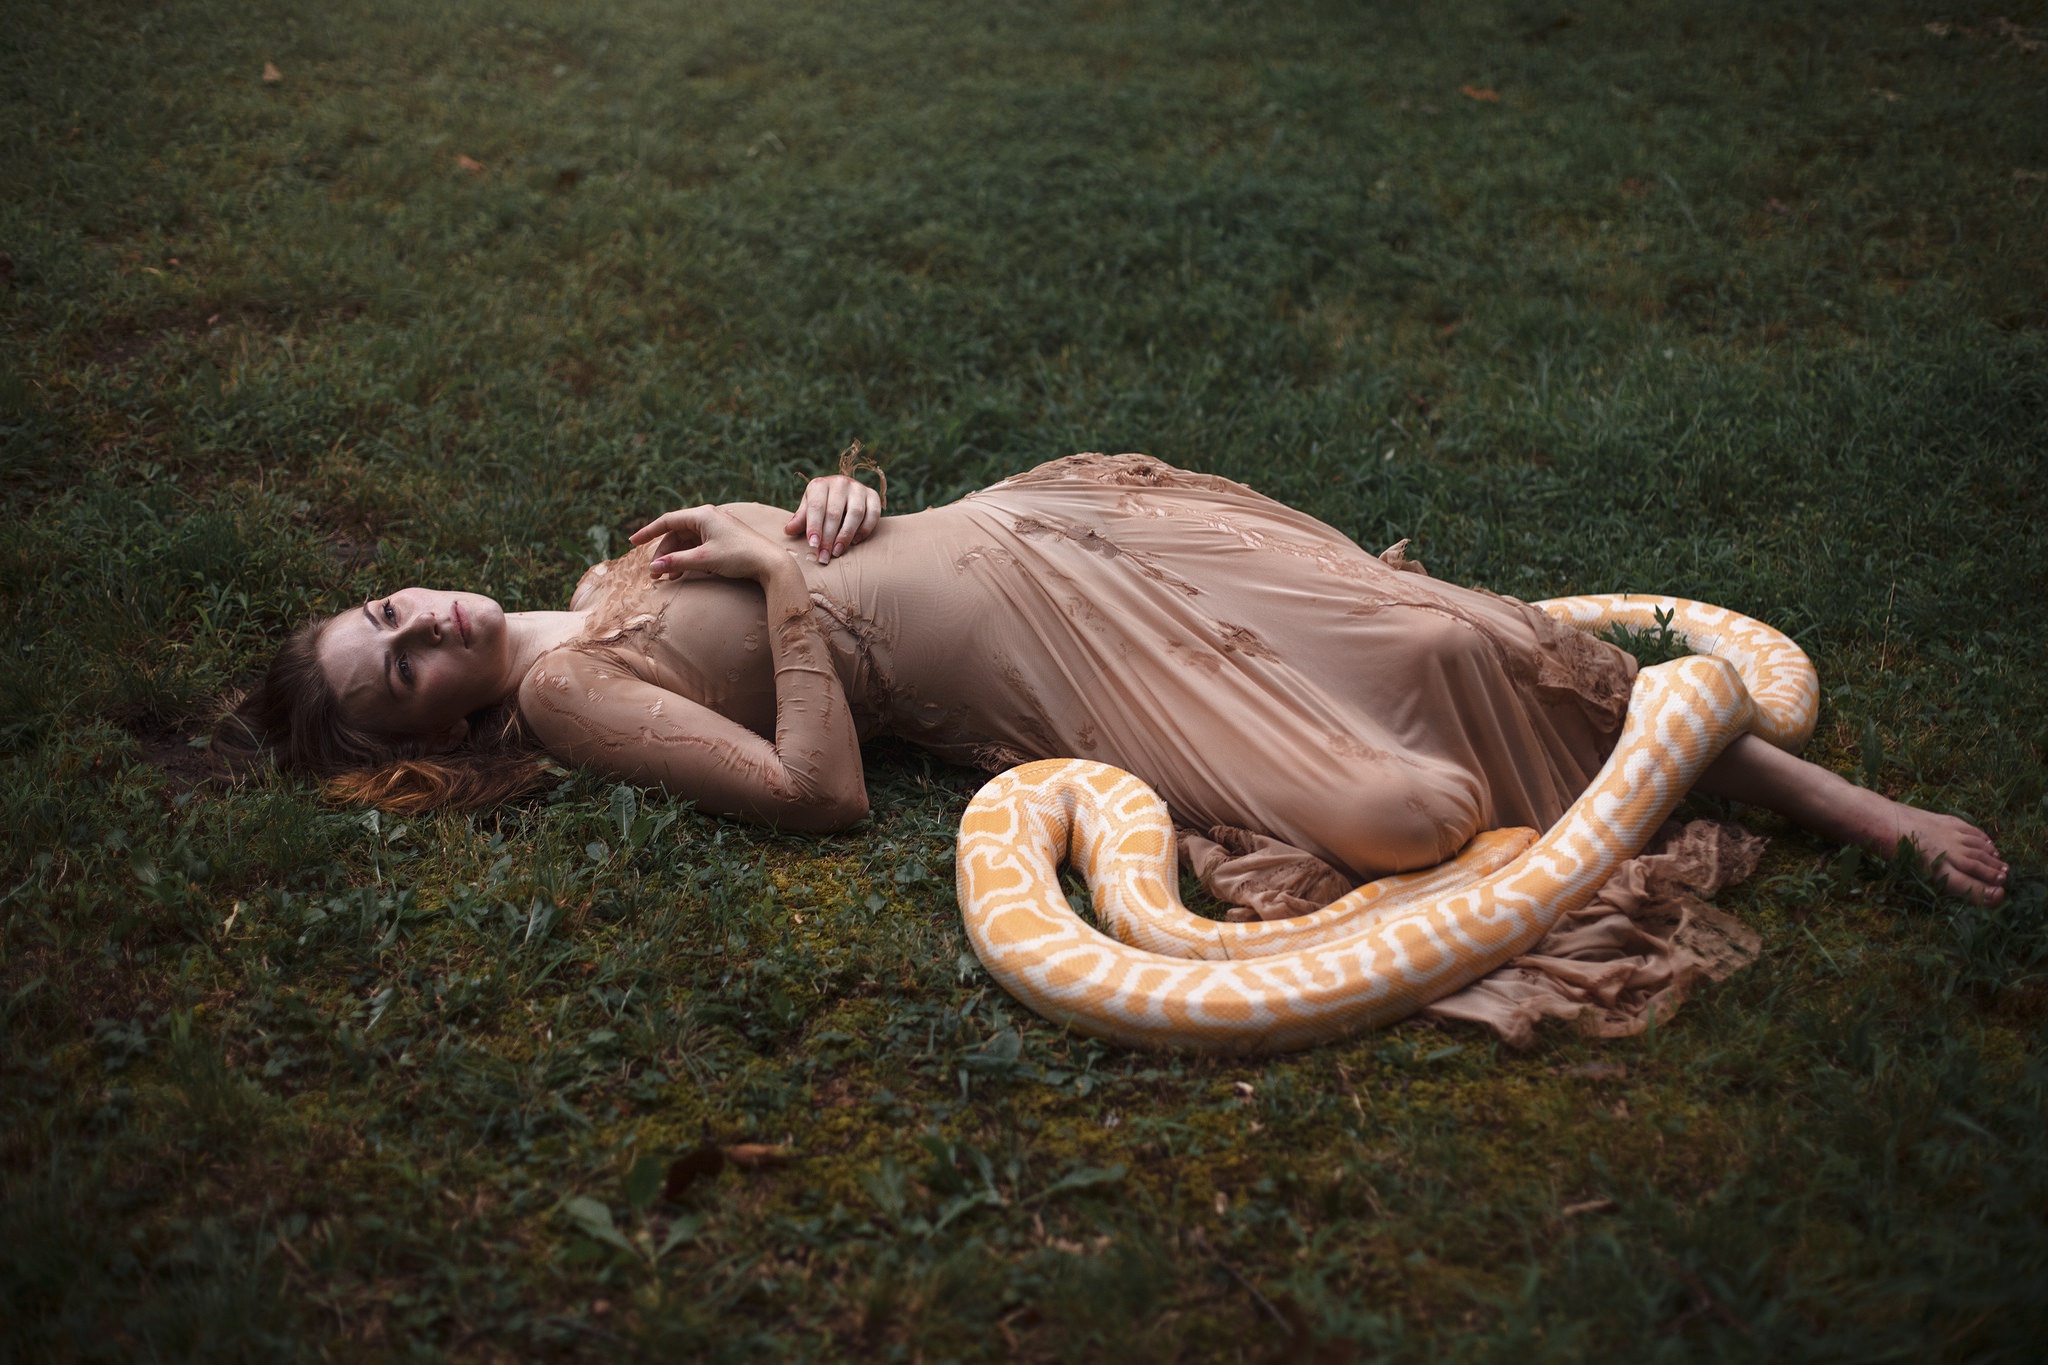 A woman was bitten by a large snake